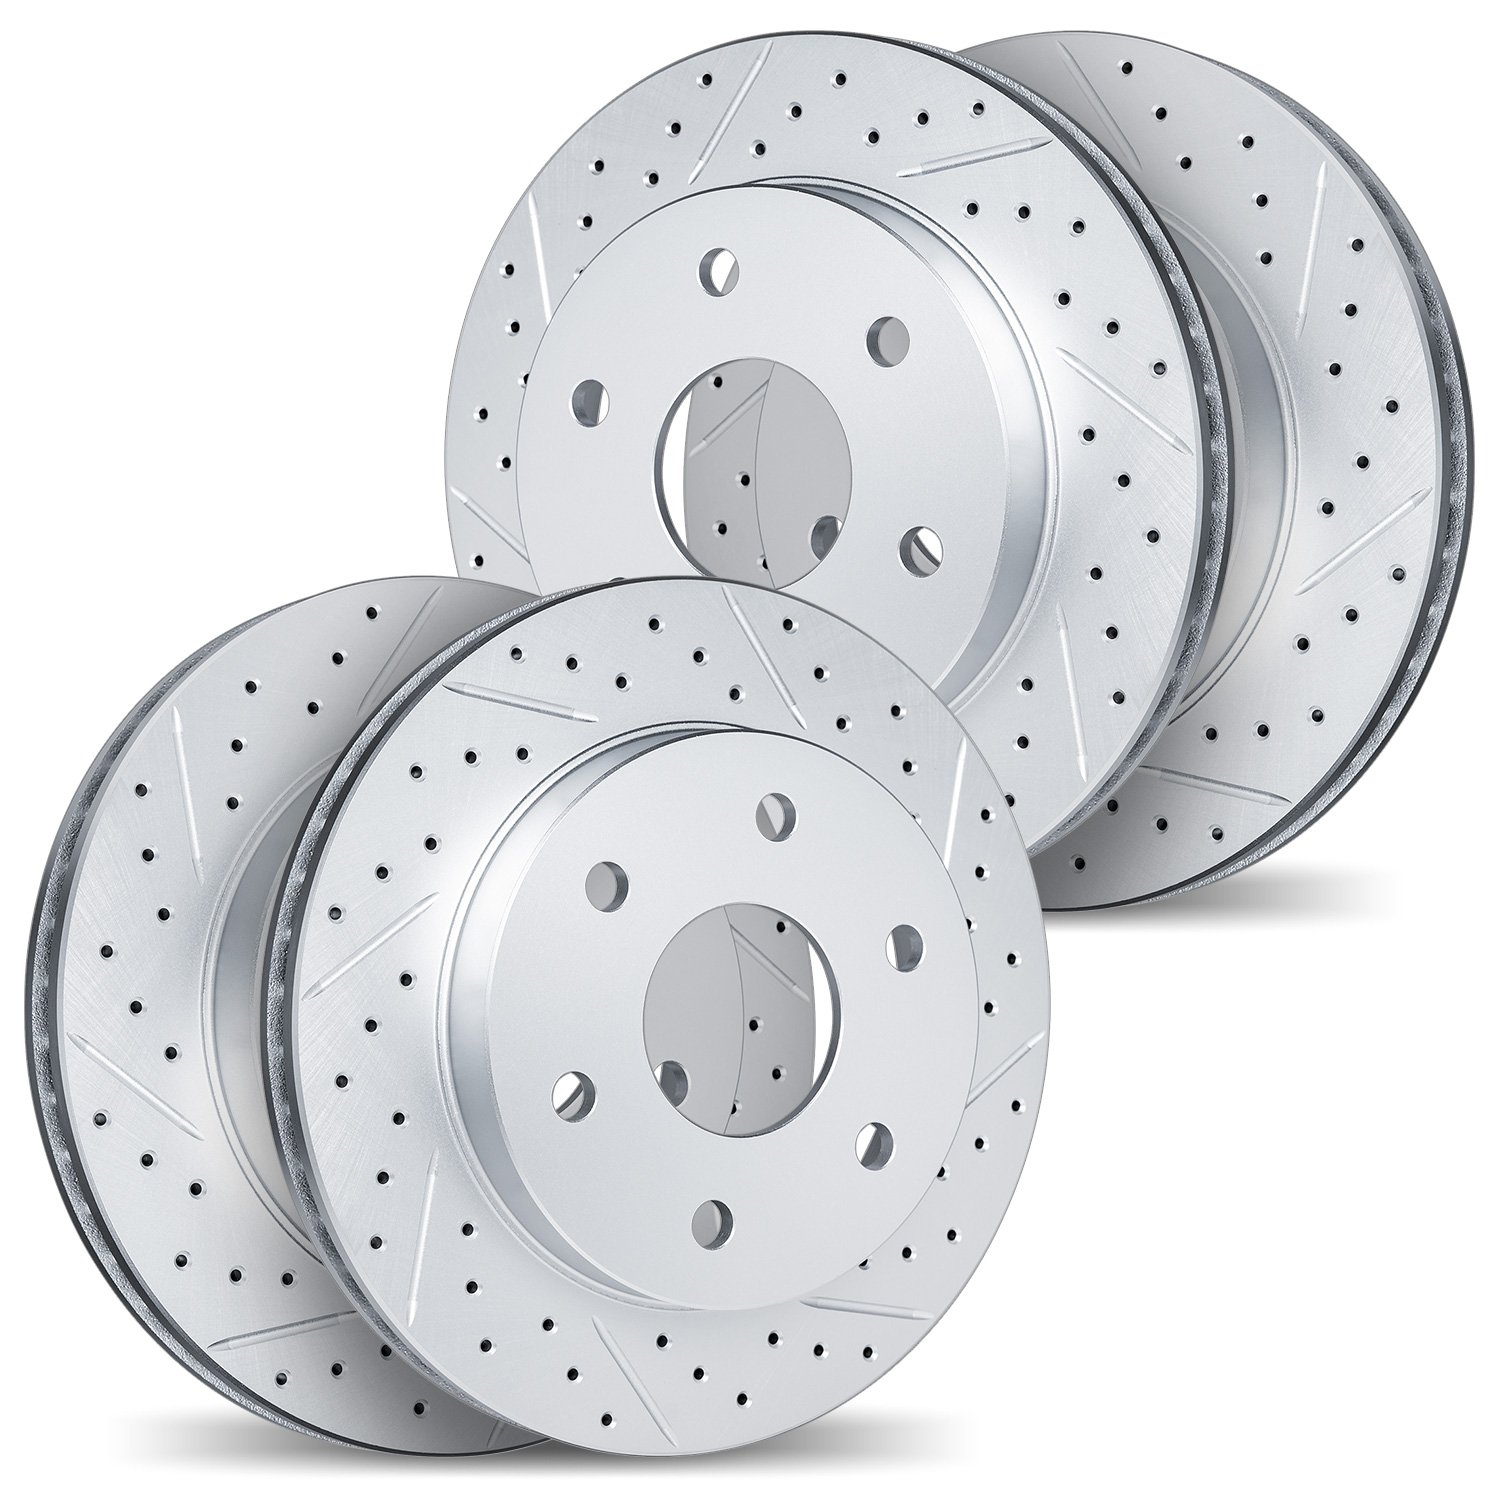 2004-40058 Geoperformance Drilled/Slotted Brake Rotors, Fits Select Multiple Makes/Models, Position: Front and Rear